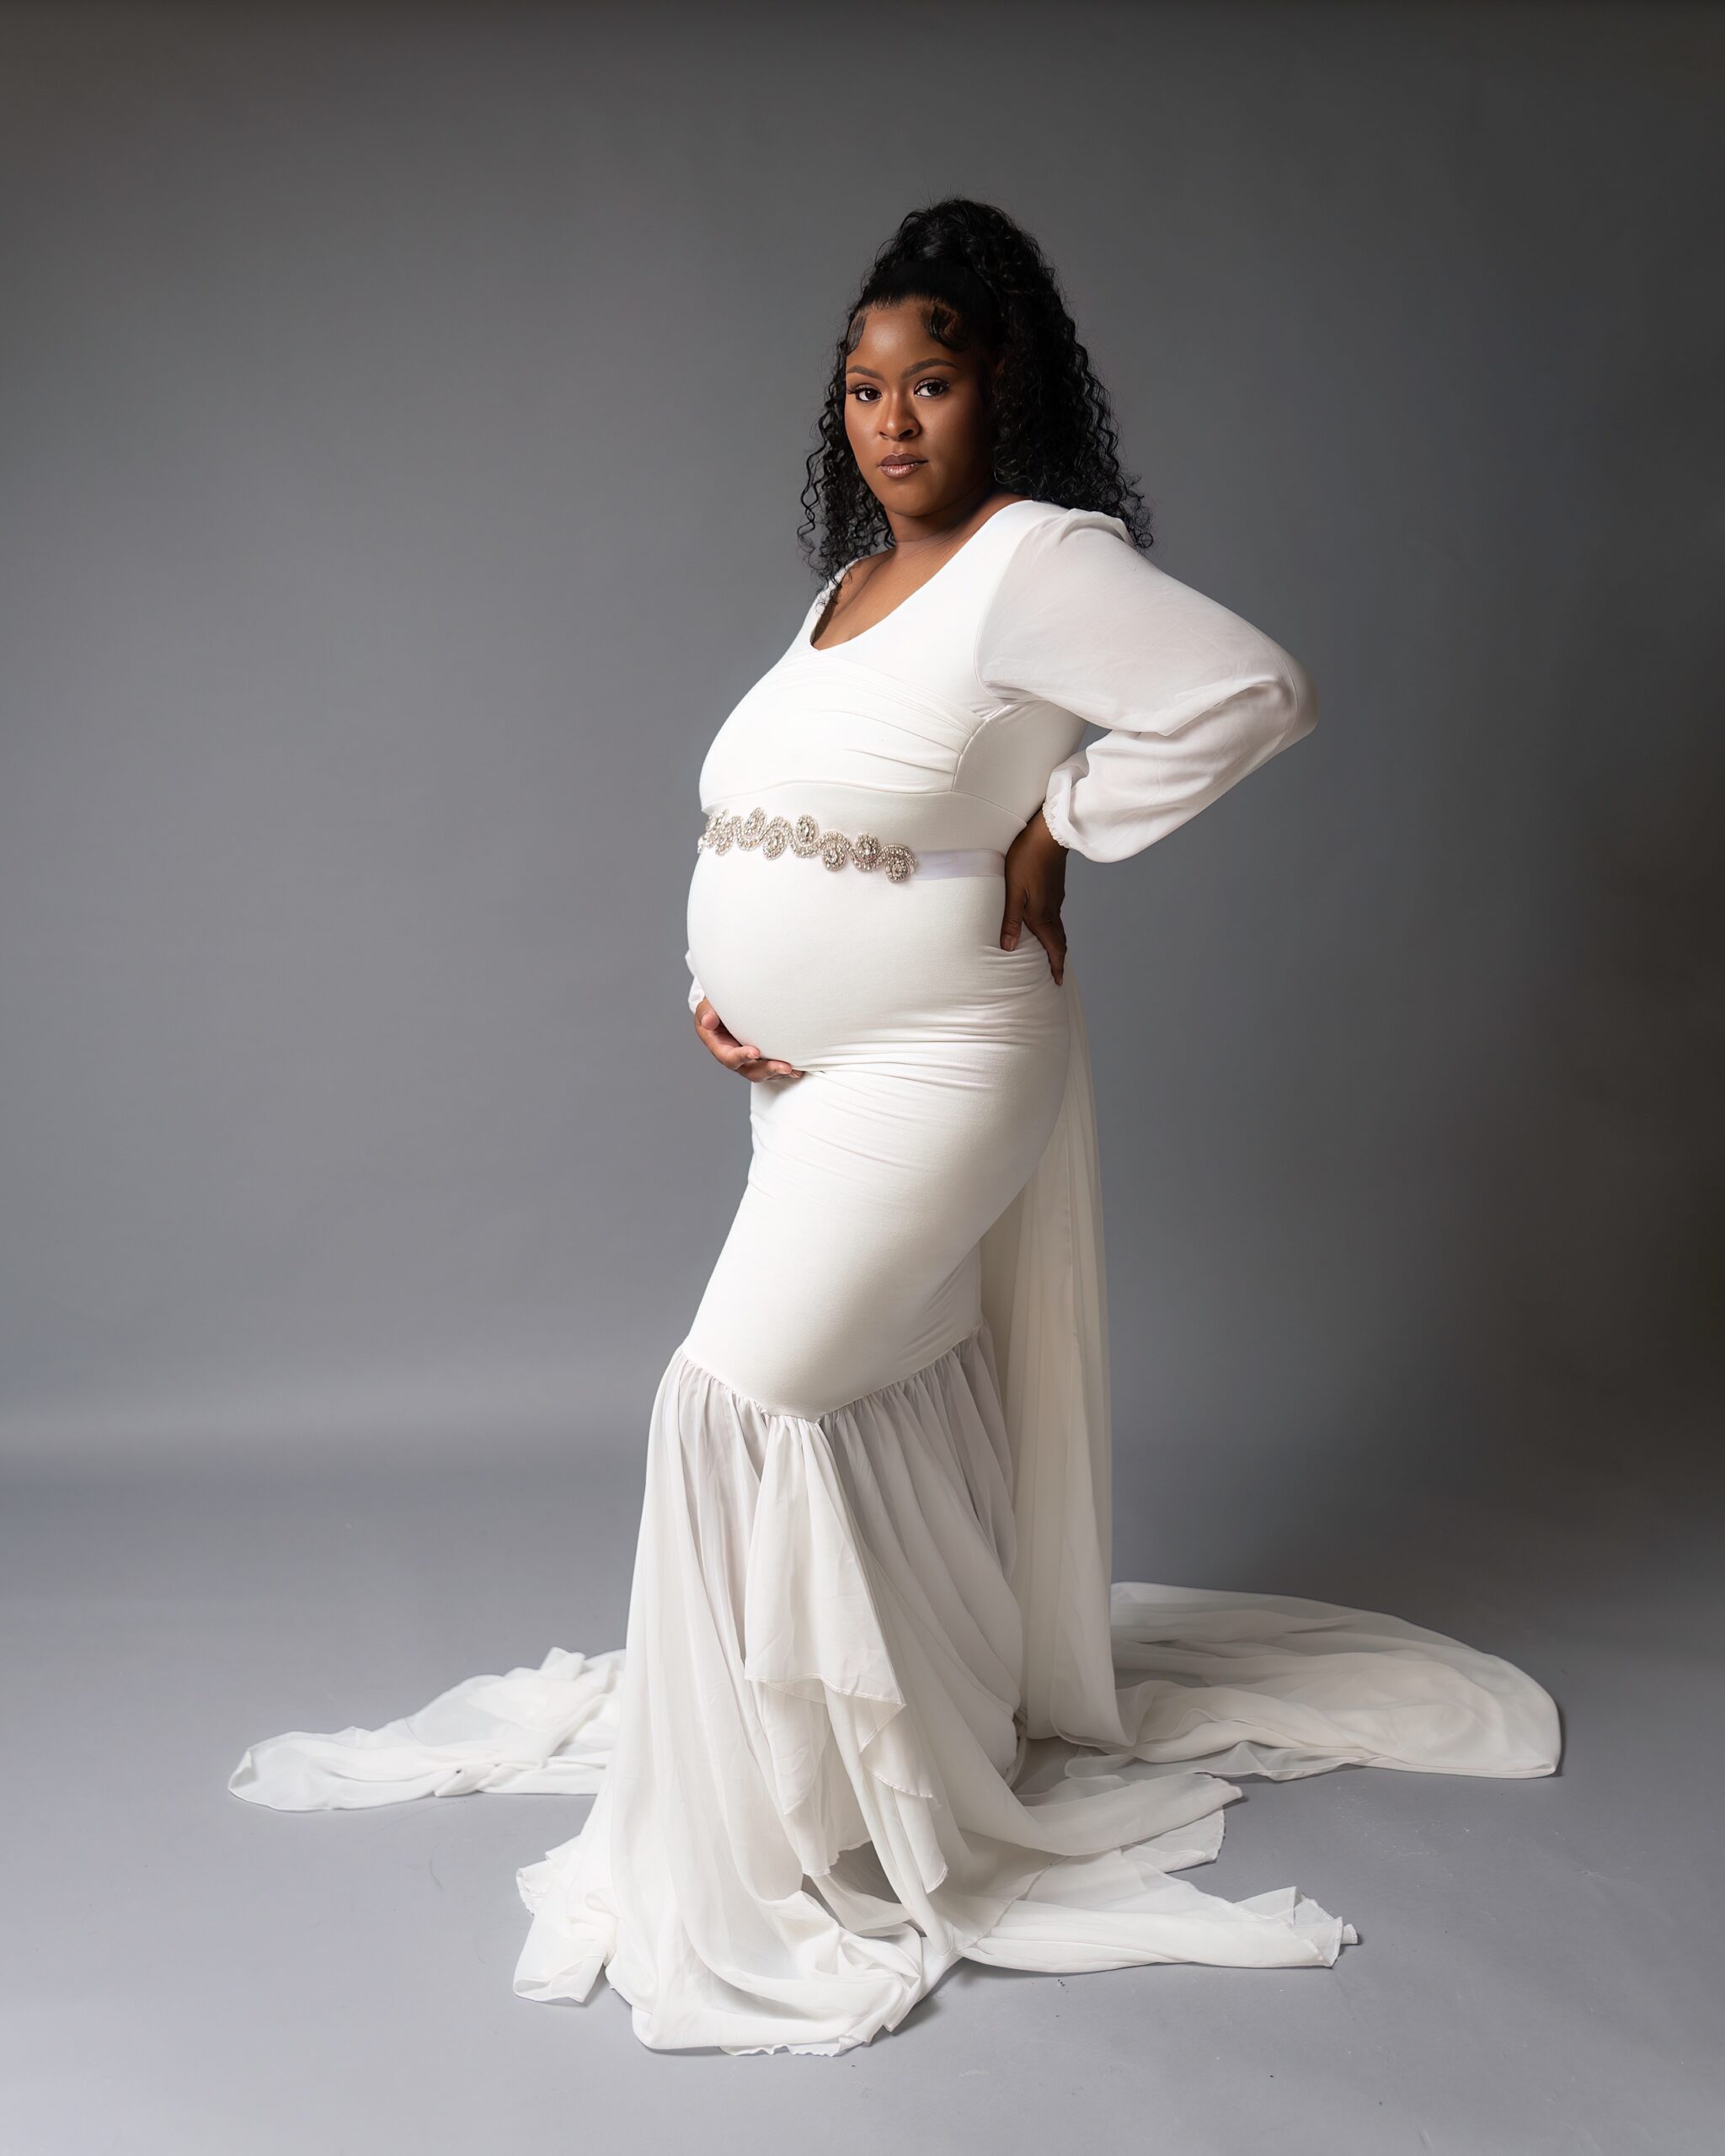 A mother to be stands in a white maternity gown with a hand on her back and other under her bump Canton Women's Center